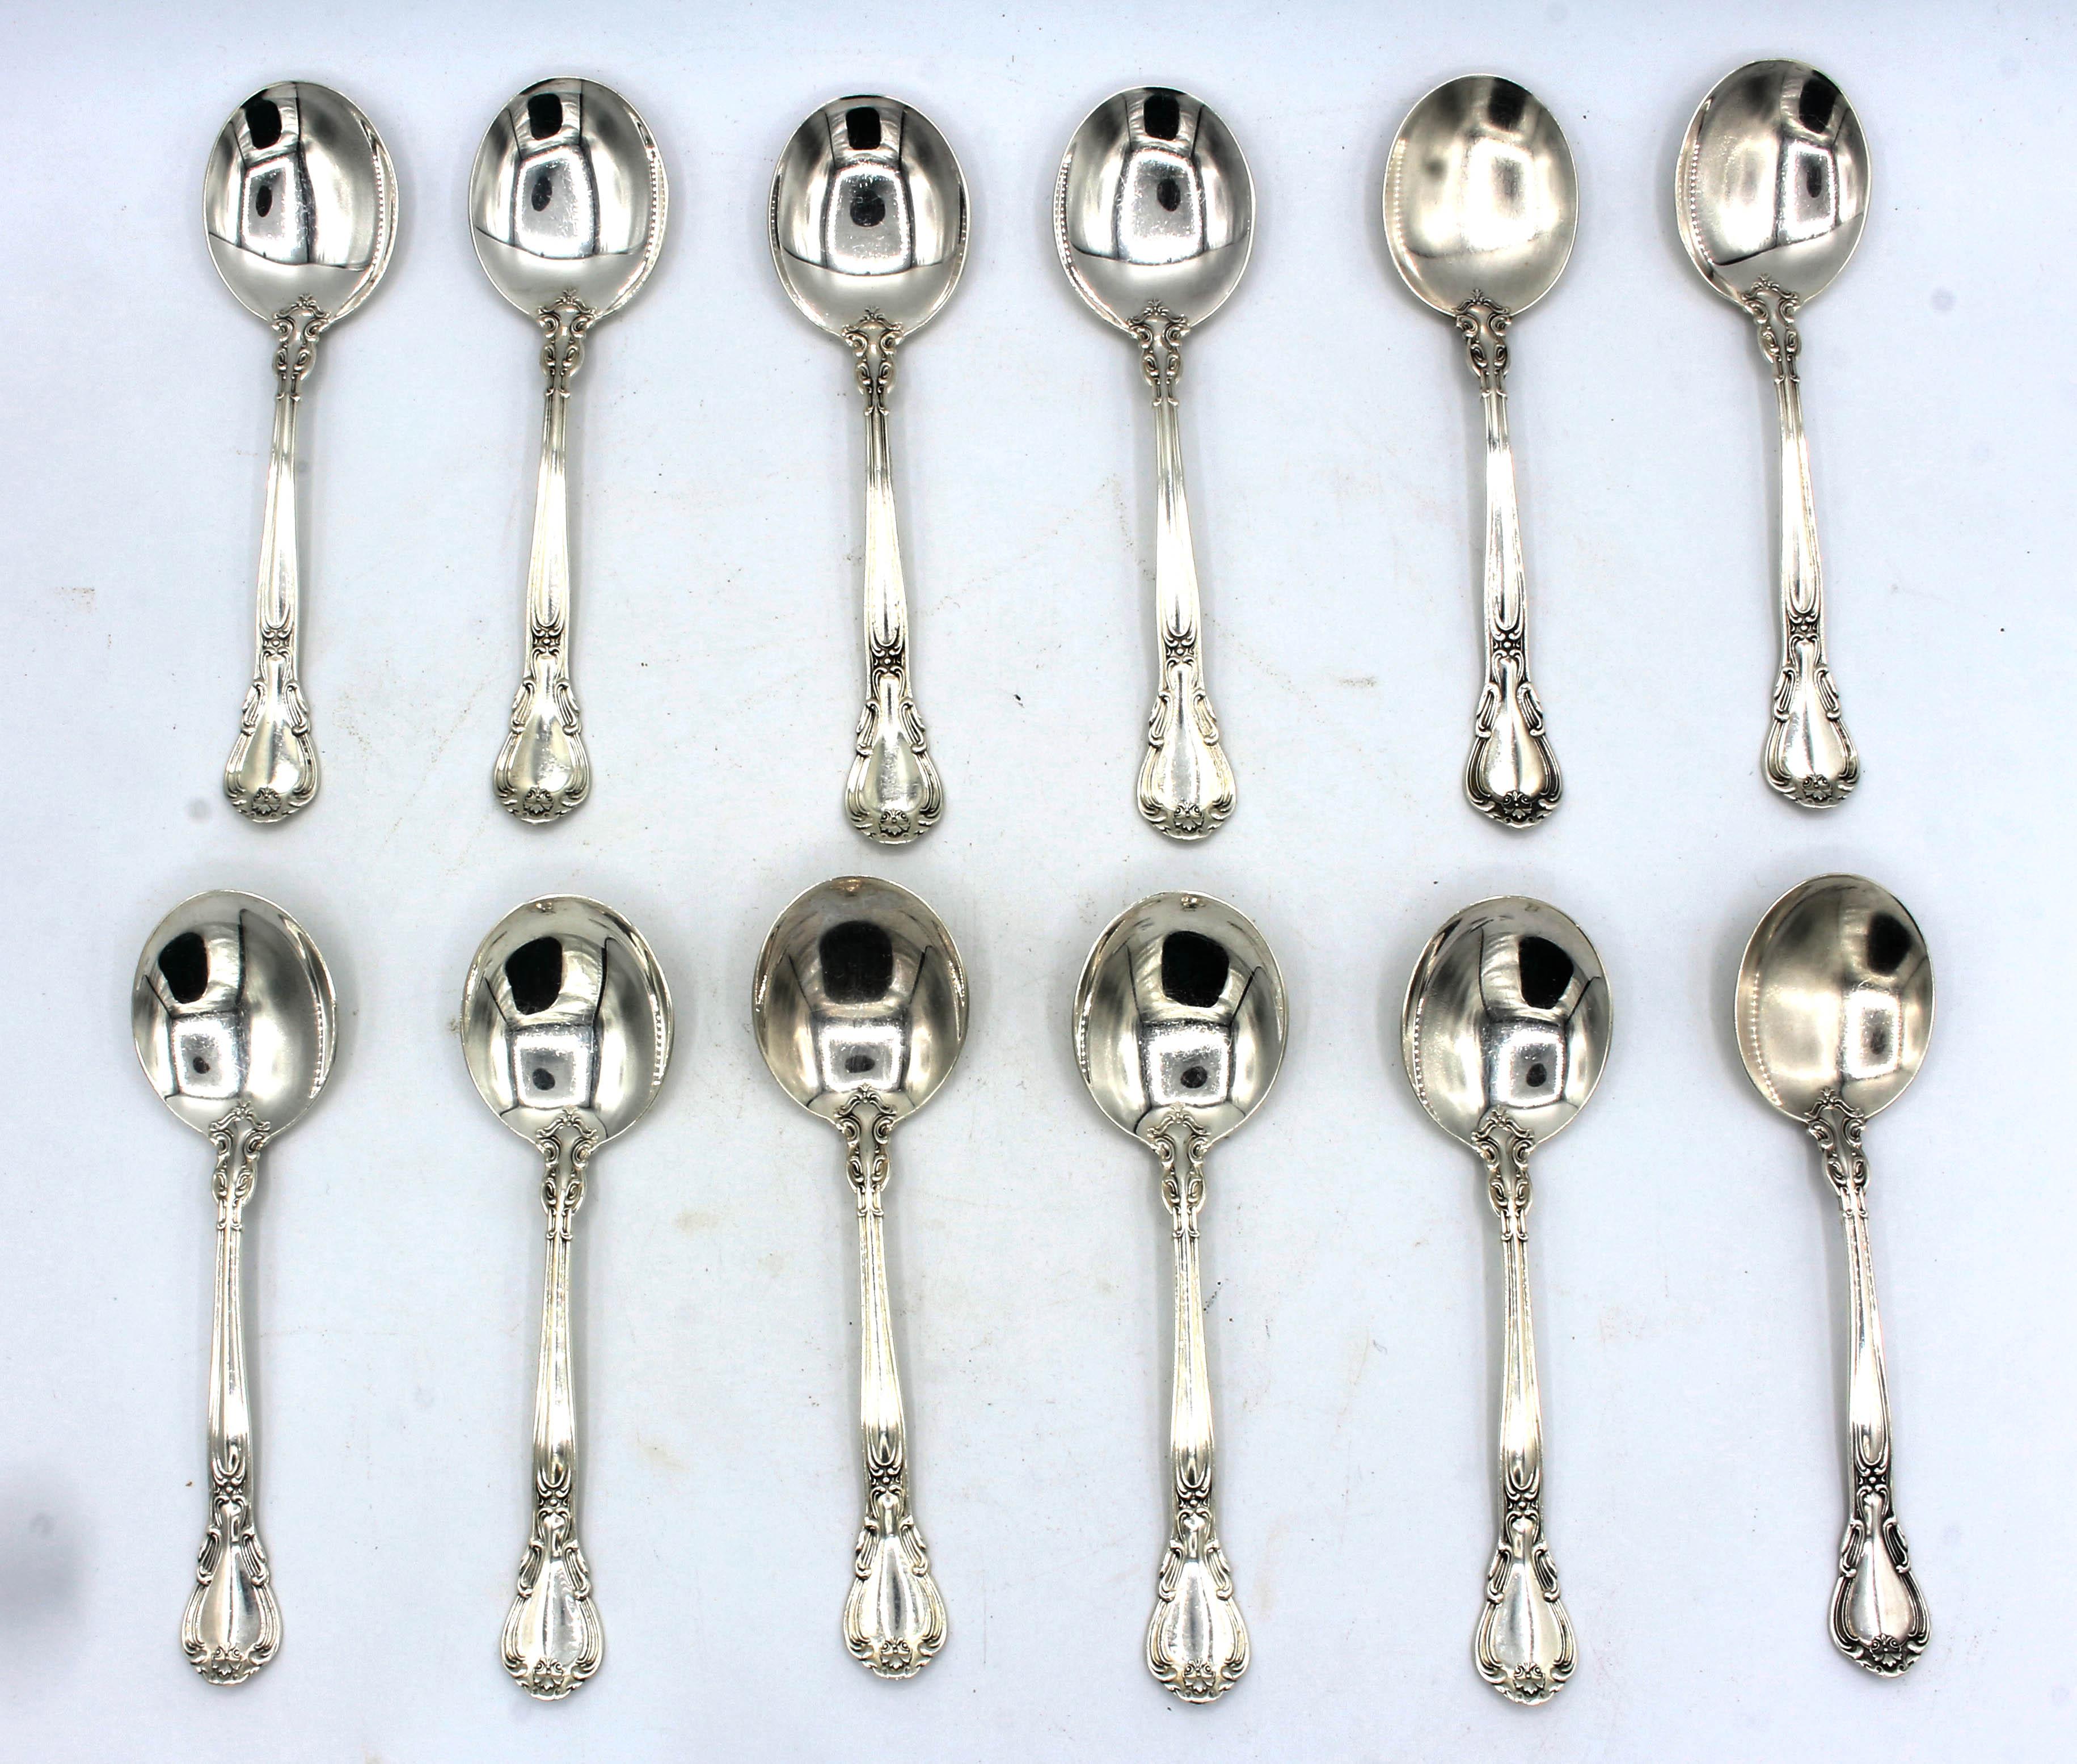 Set of 12 Chantilly pattern by Gorham cream soup spoons. Never monogramed. 1895 patent design. c.1950s-70s. 14.45 troy oz.
6.25